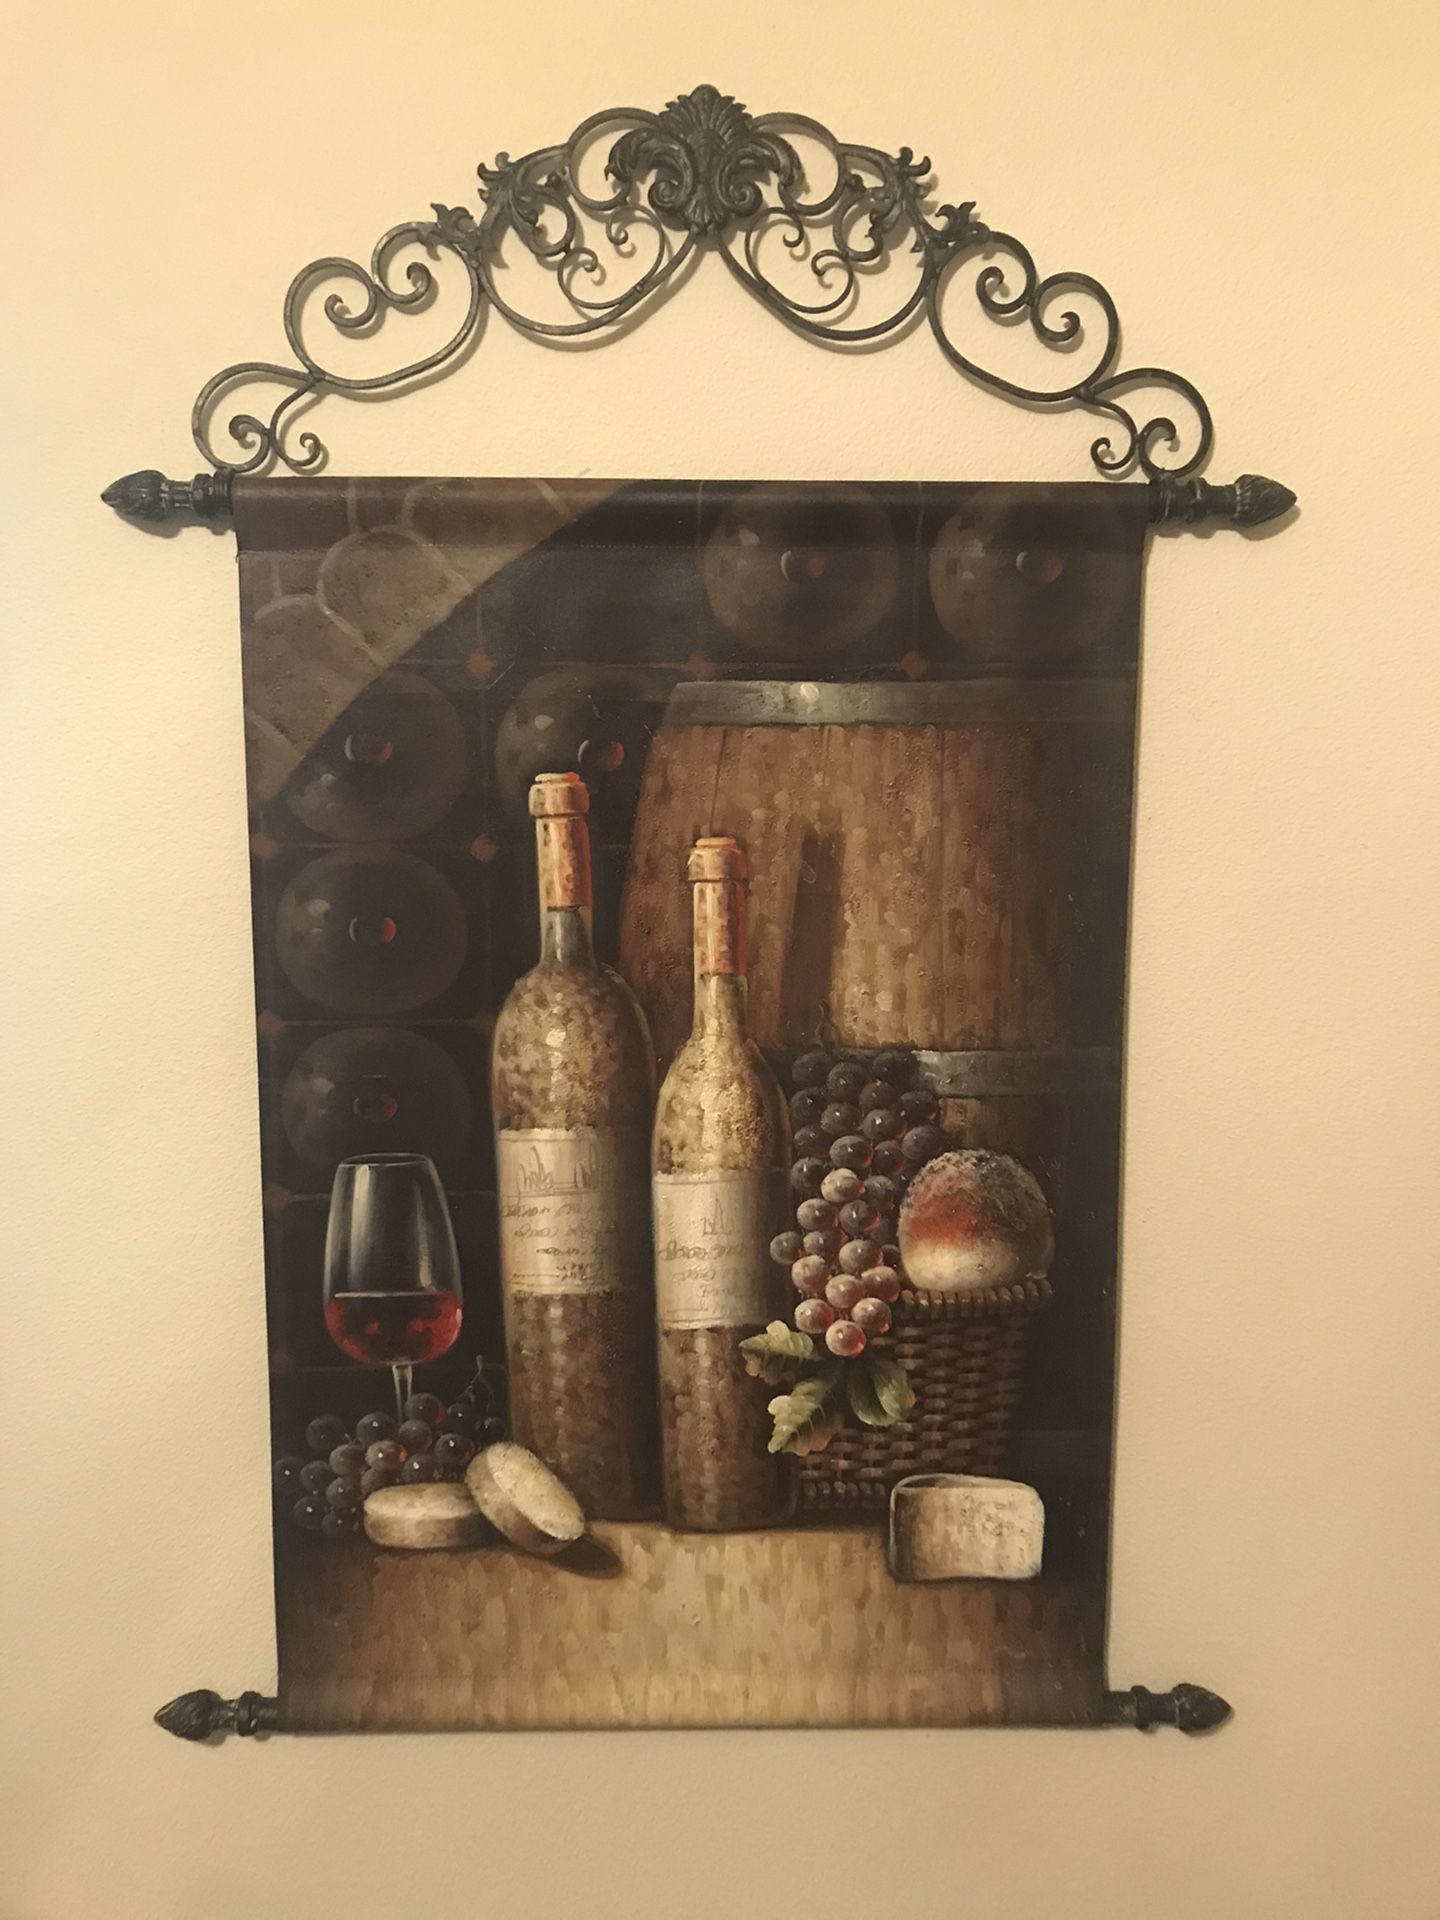 Original Painting On Canvas With Heavy Metal  Frame.  Wine,  Grapes,  Bread. What More Could You Want.  Perfect For Bar , Dining Room.